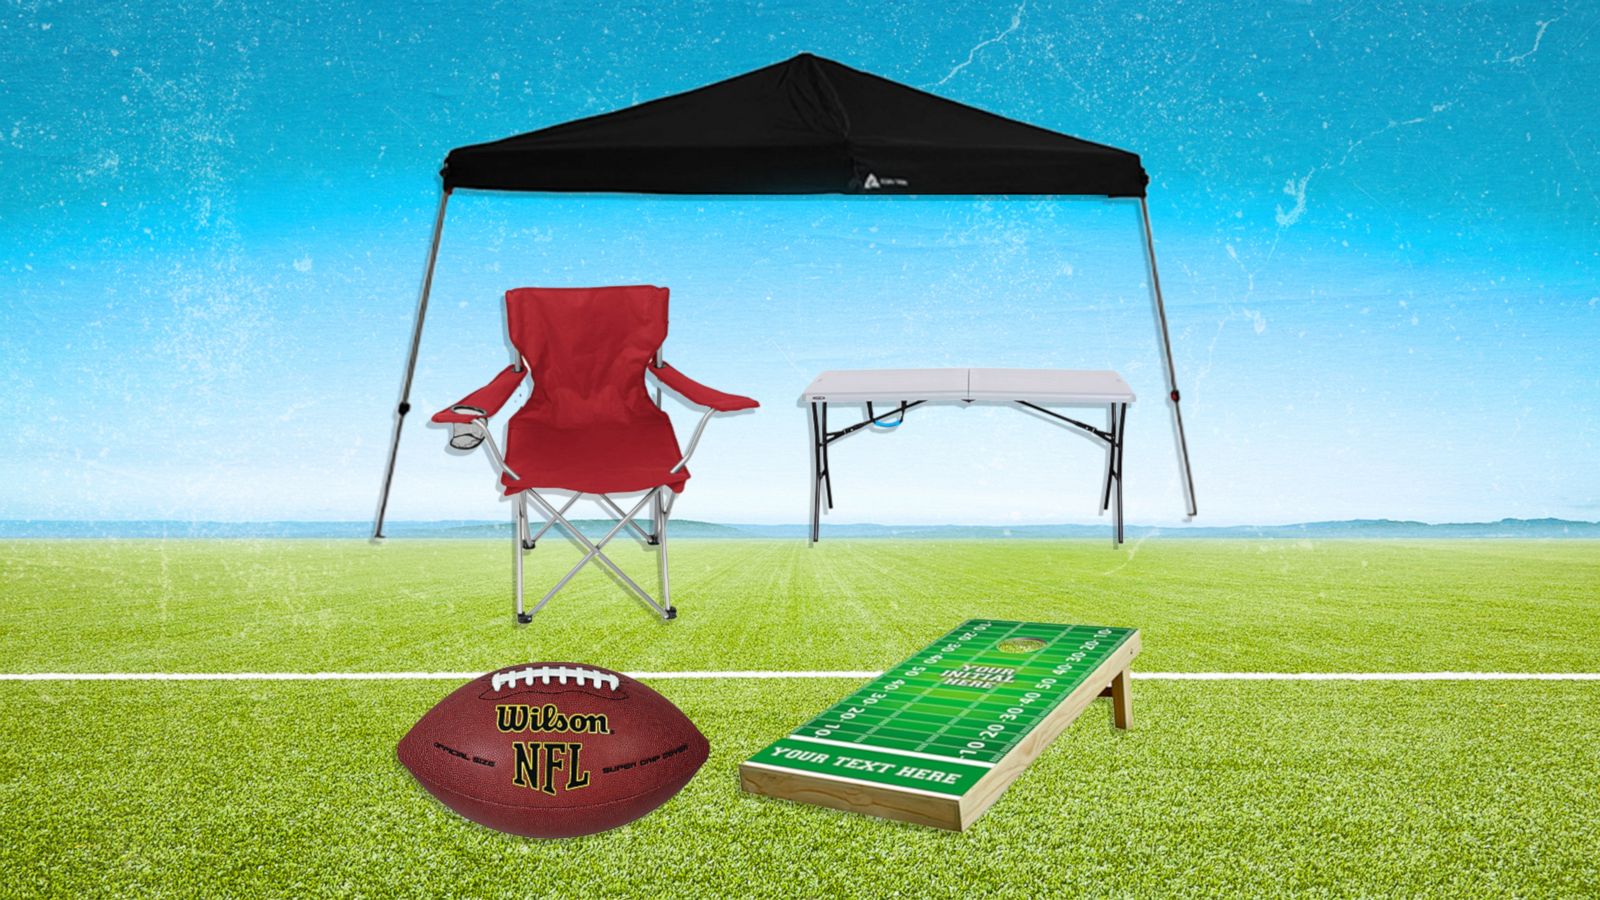 YETI releases fall tailgate essentials and gift ideas